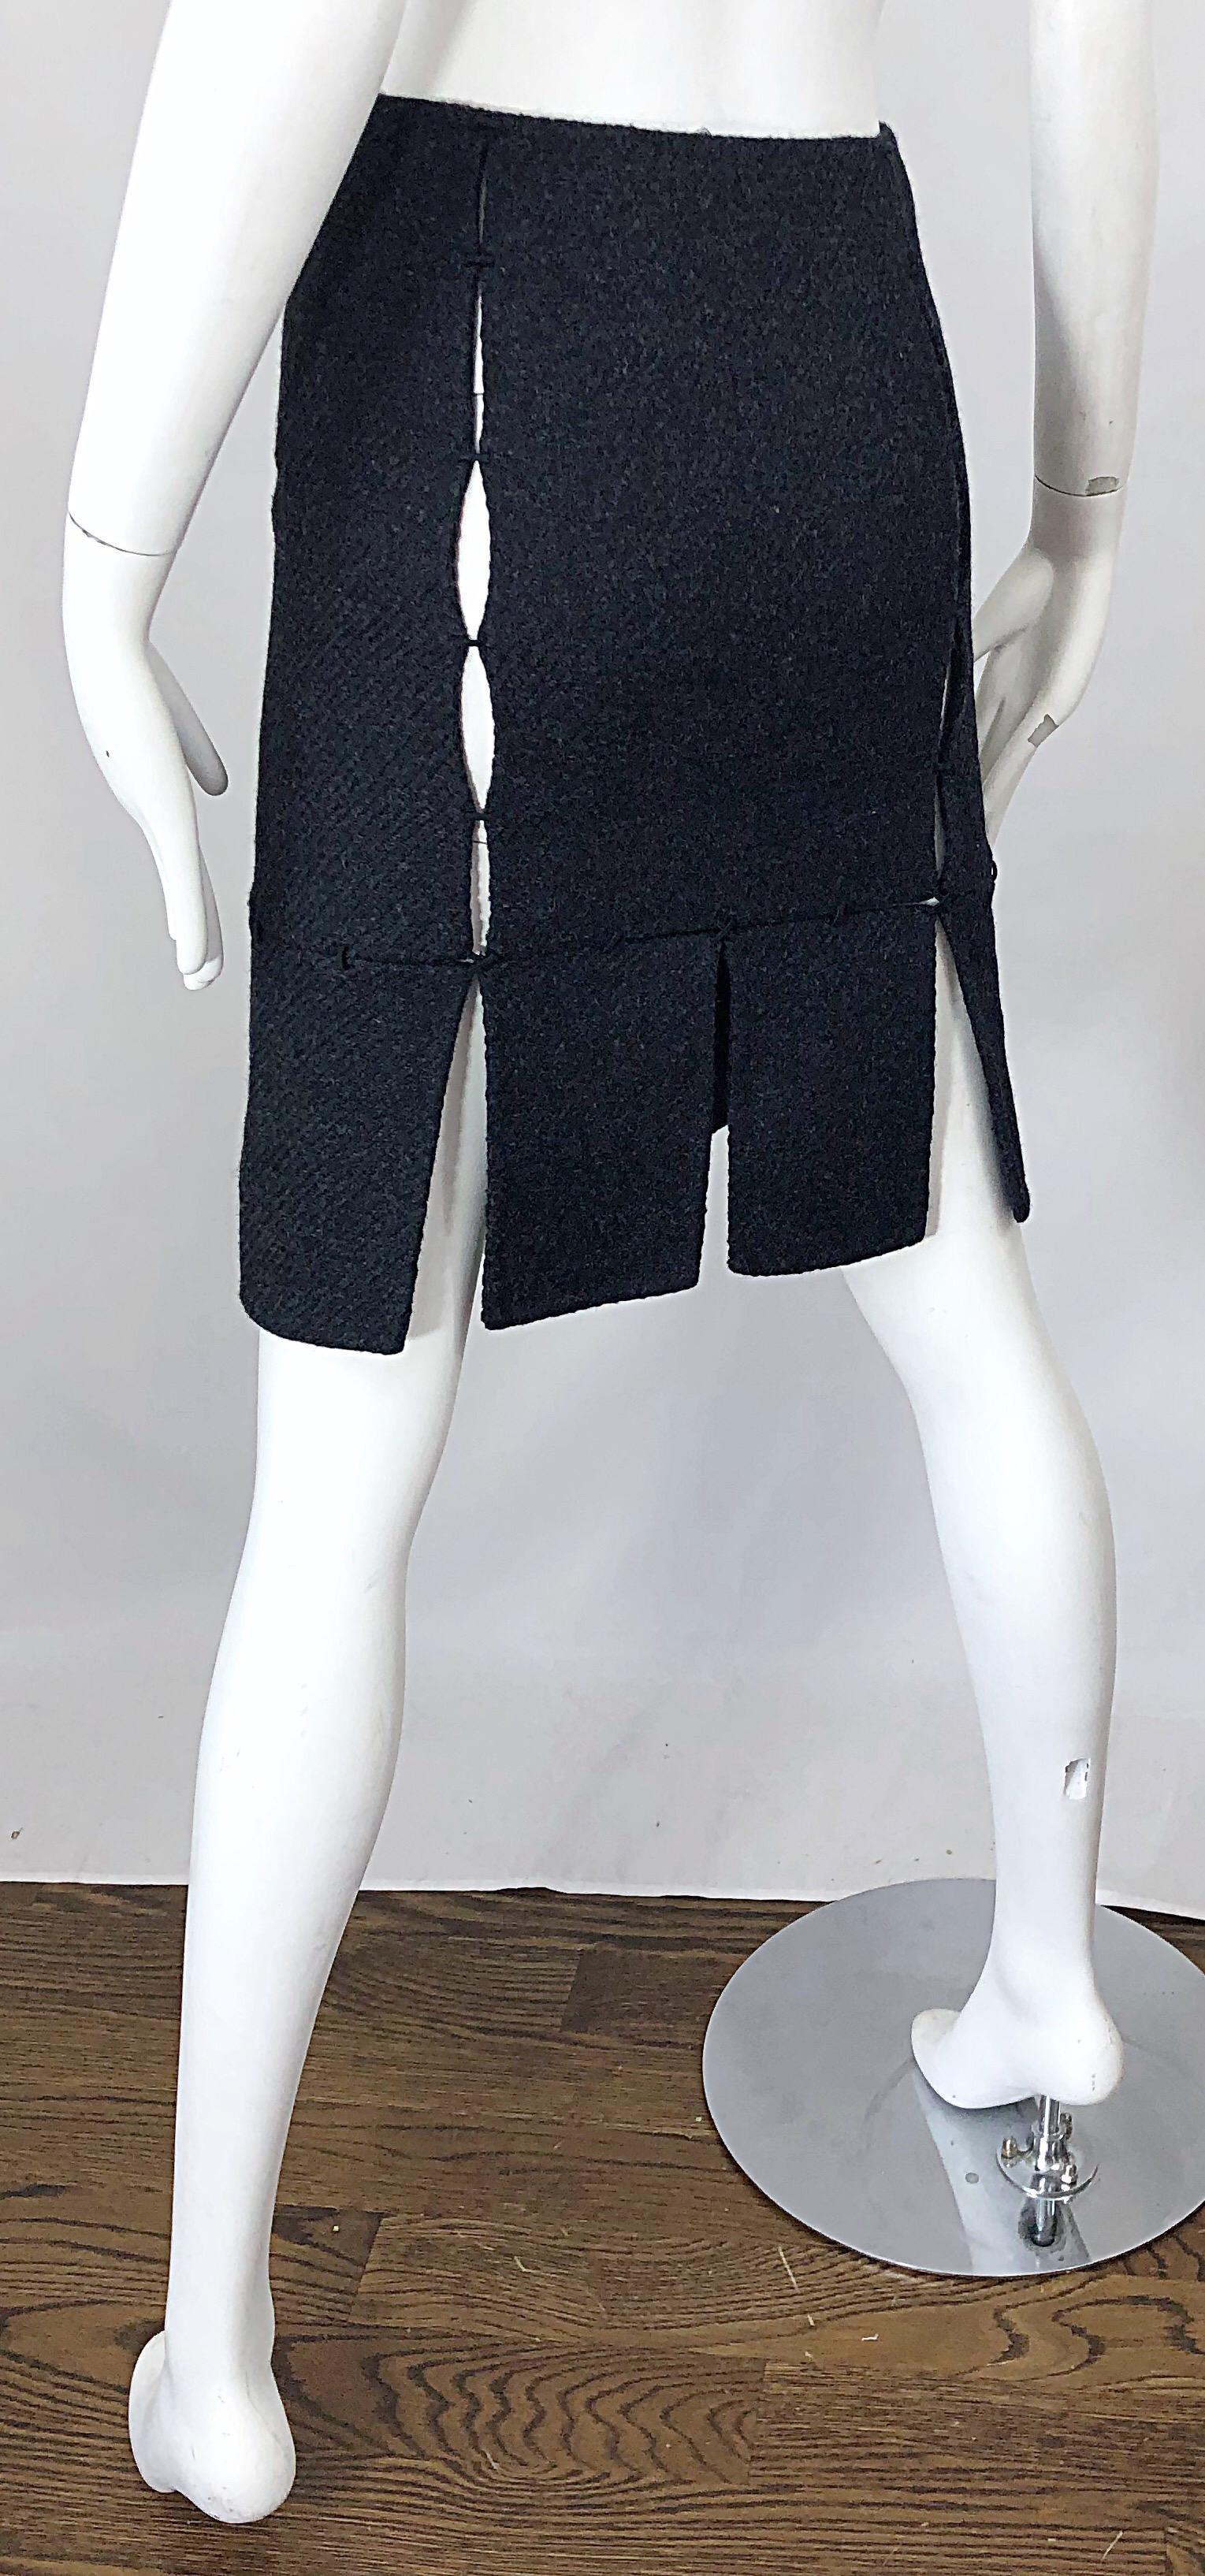 1990s Prada Charcoal Grey Cut - Out High Waisted Wool Vintage 90s Pencil Skirt 4